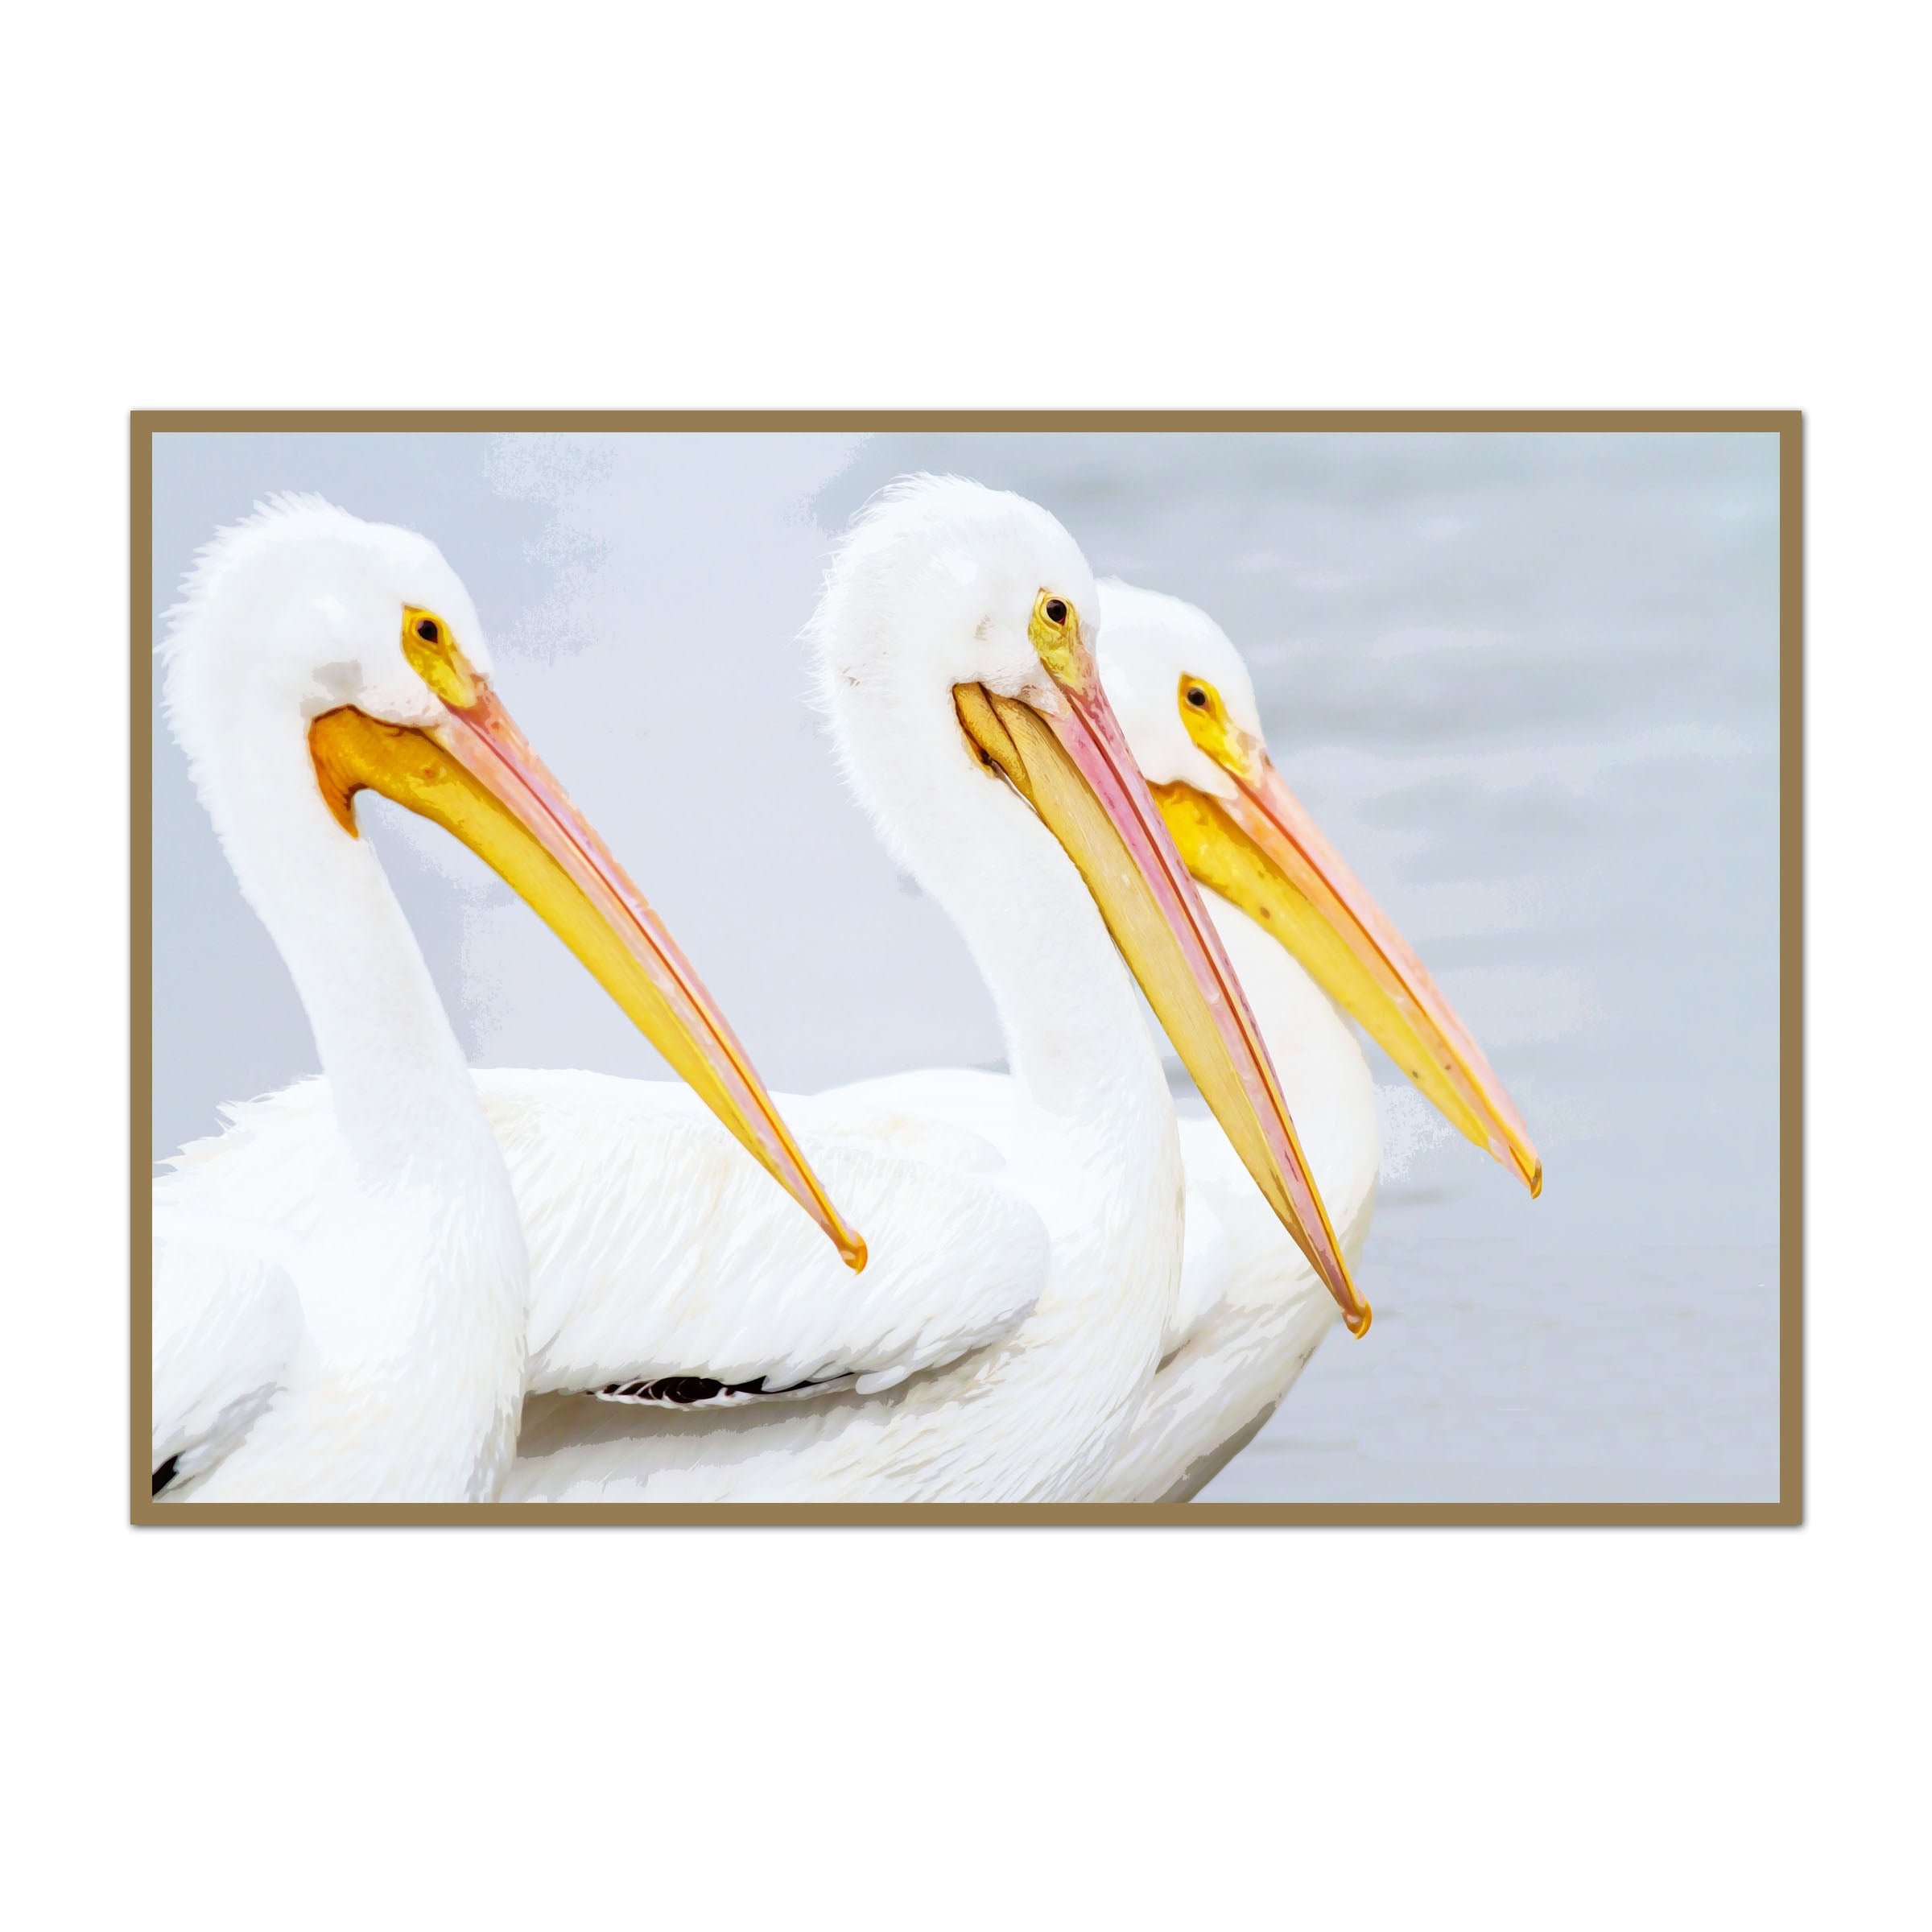 Pelican Brothers